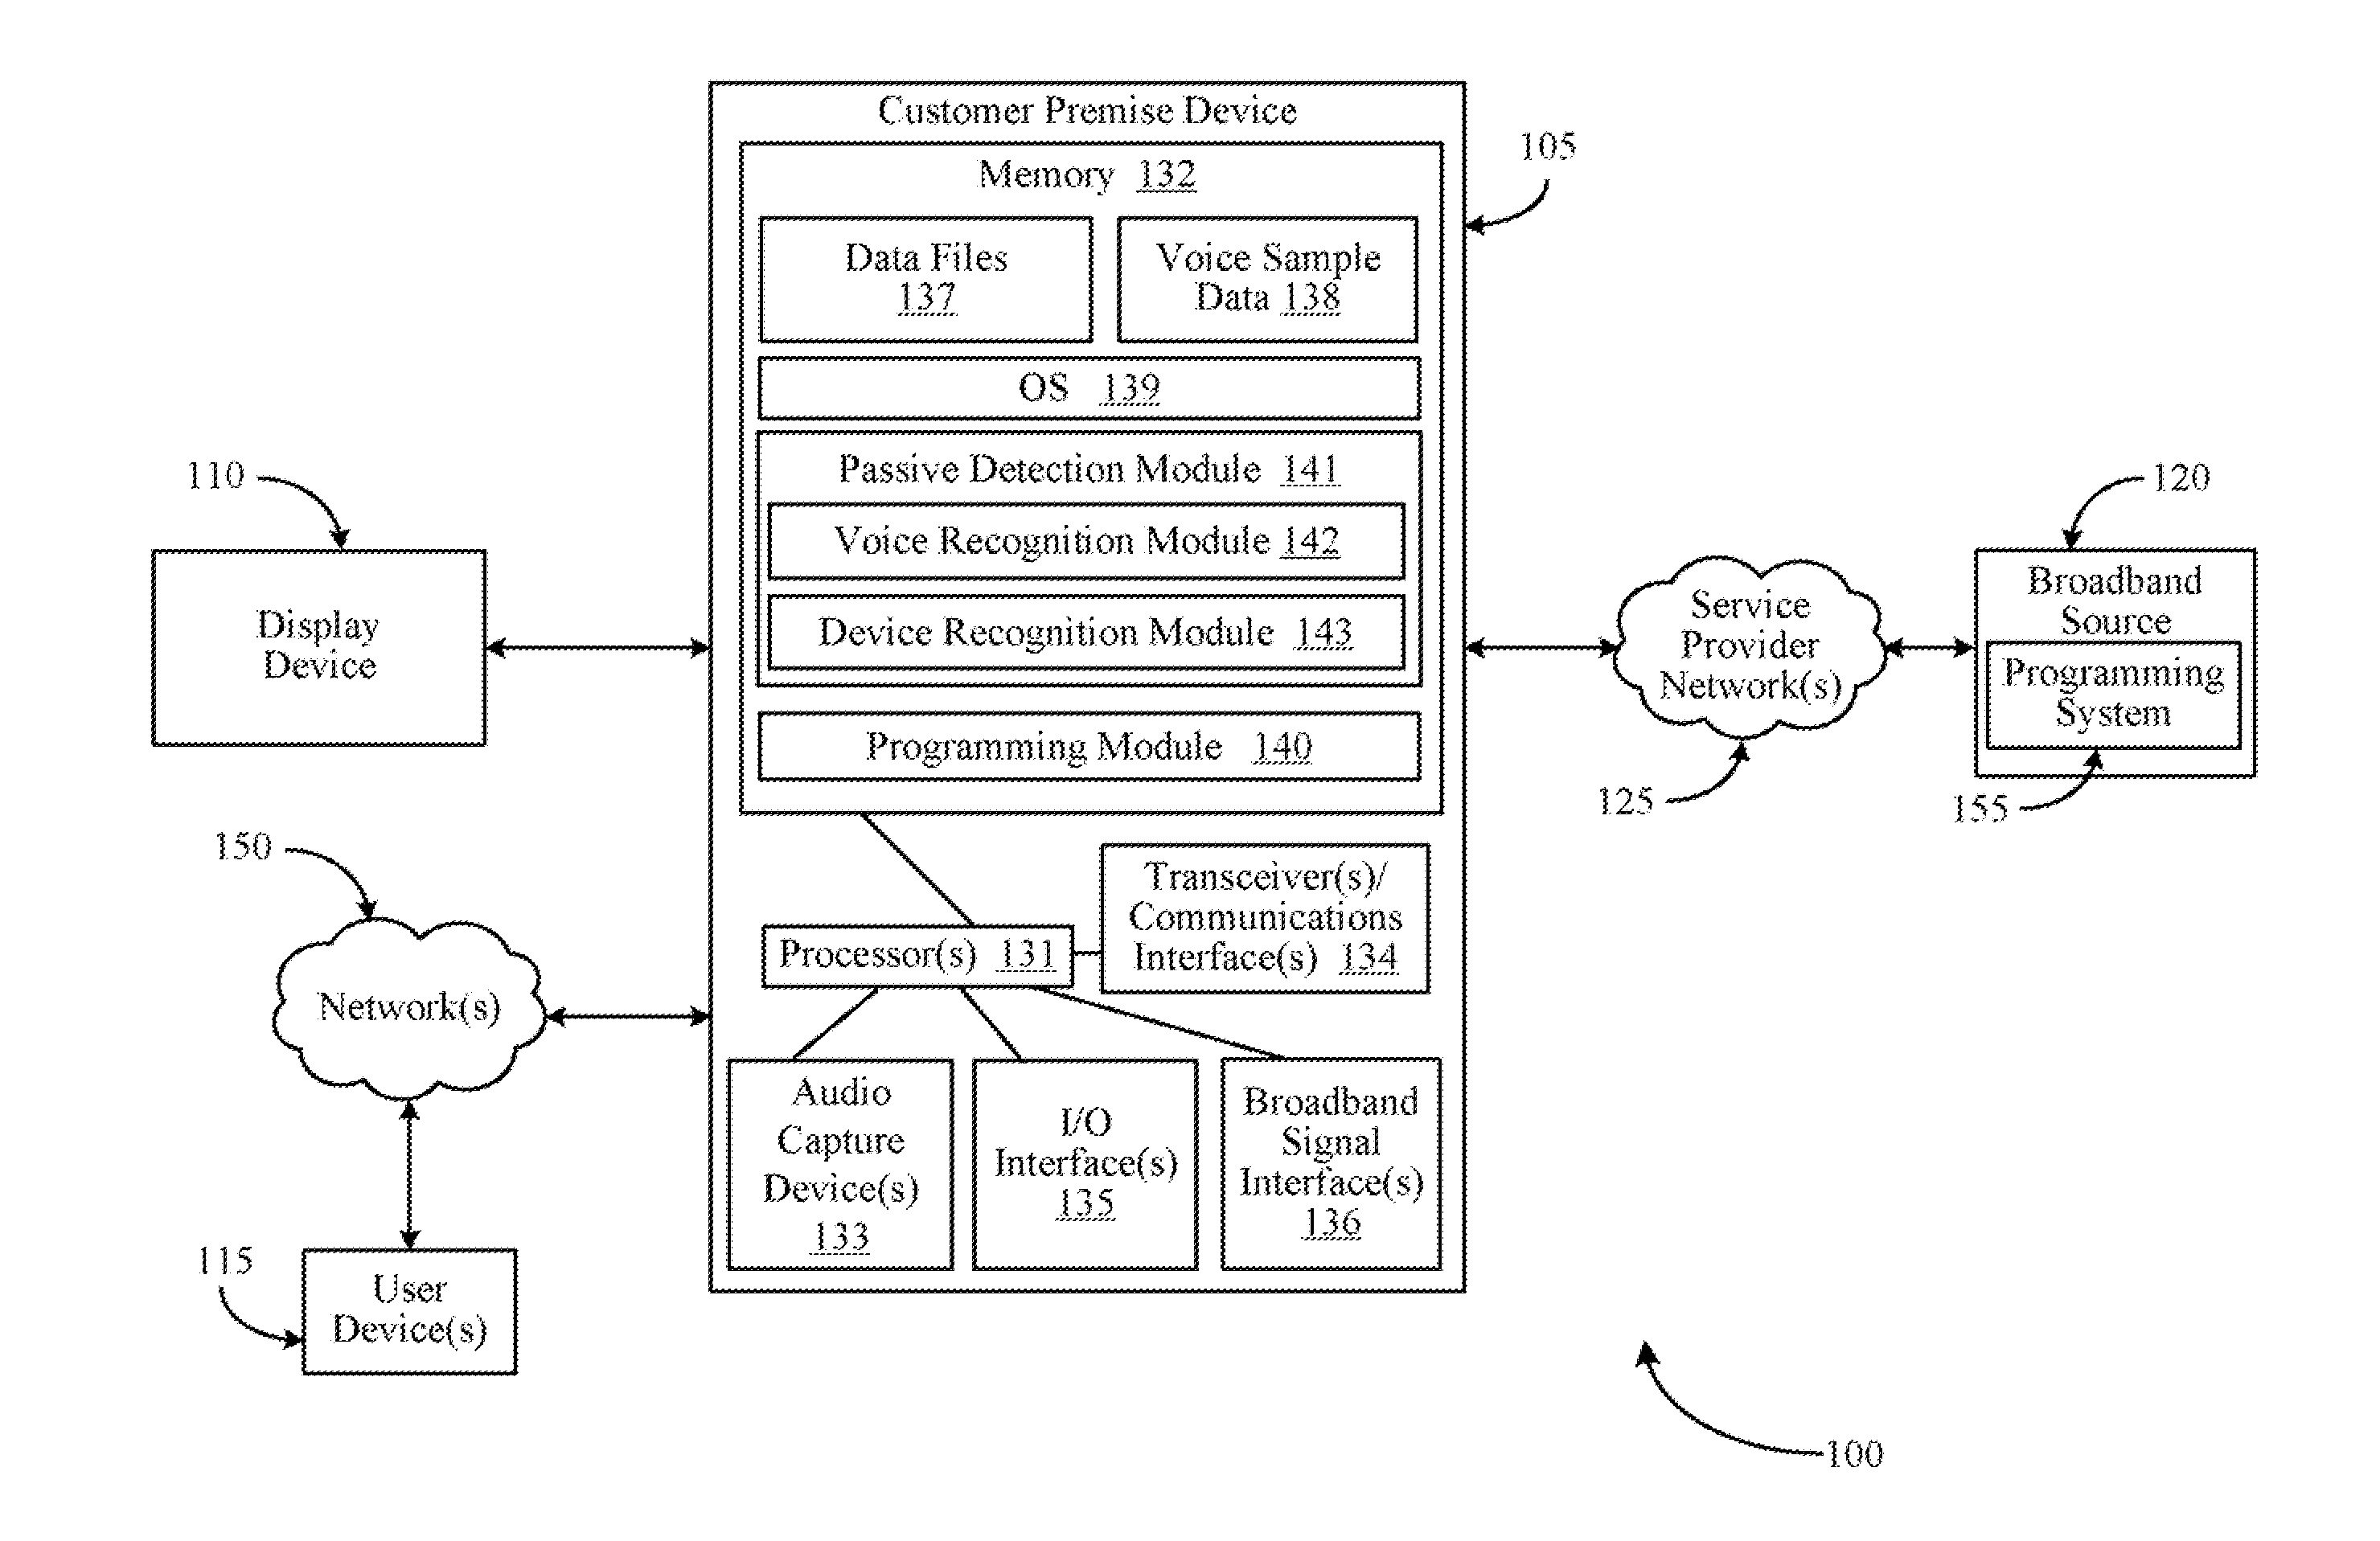 Systems and methods for customizing broadband content based upon passive presence detection of users